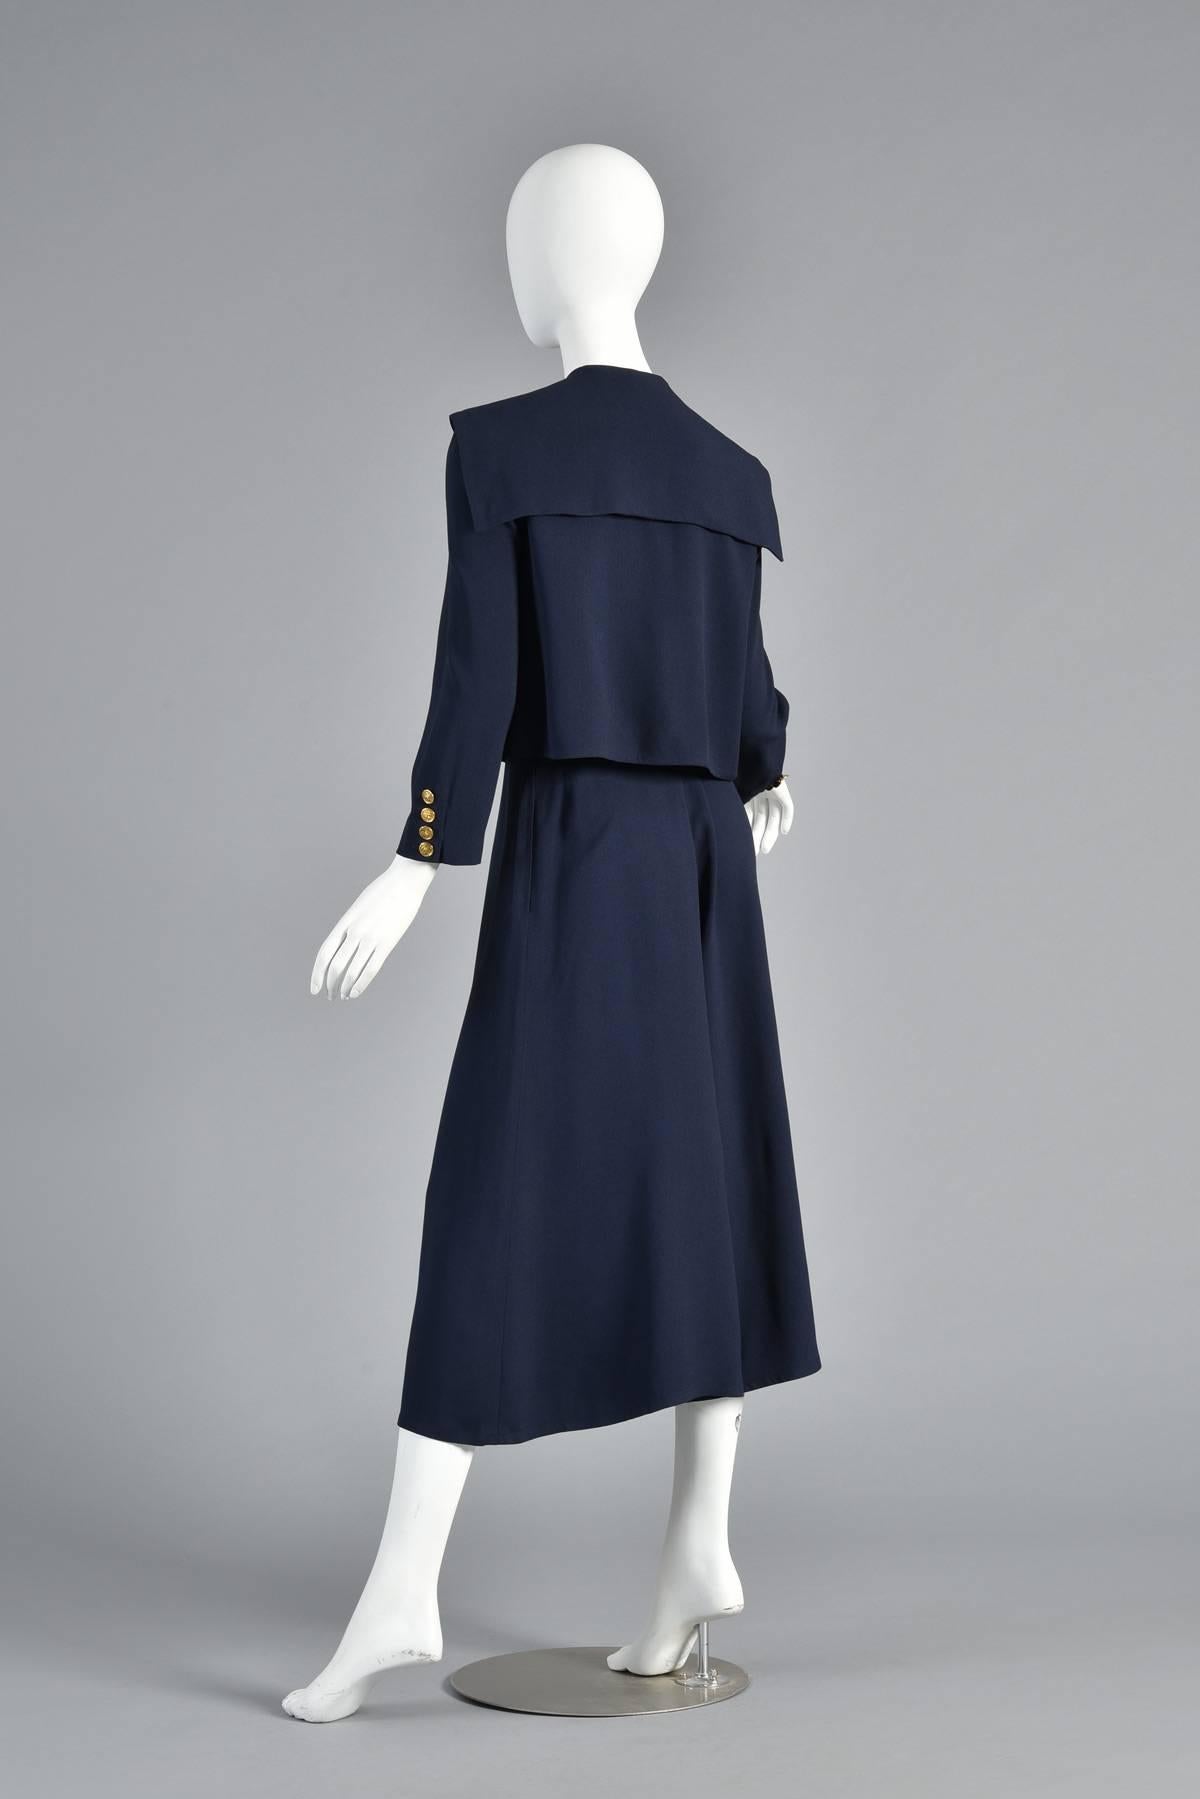 Sonia Rykiel Sailor Inspired Gaucho Pant Suit For Sale 3